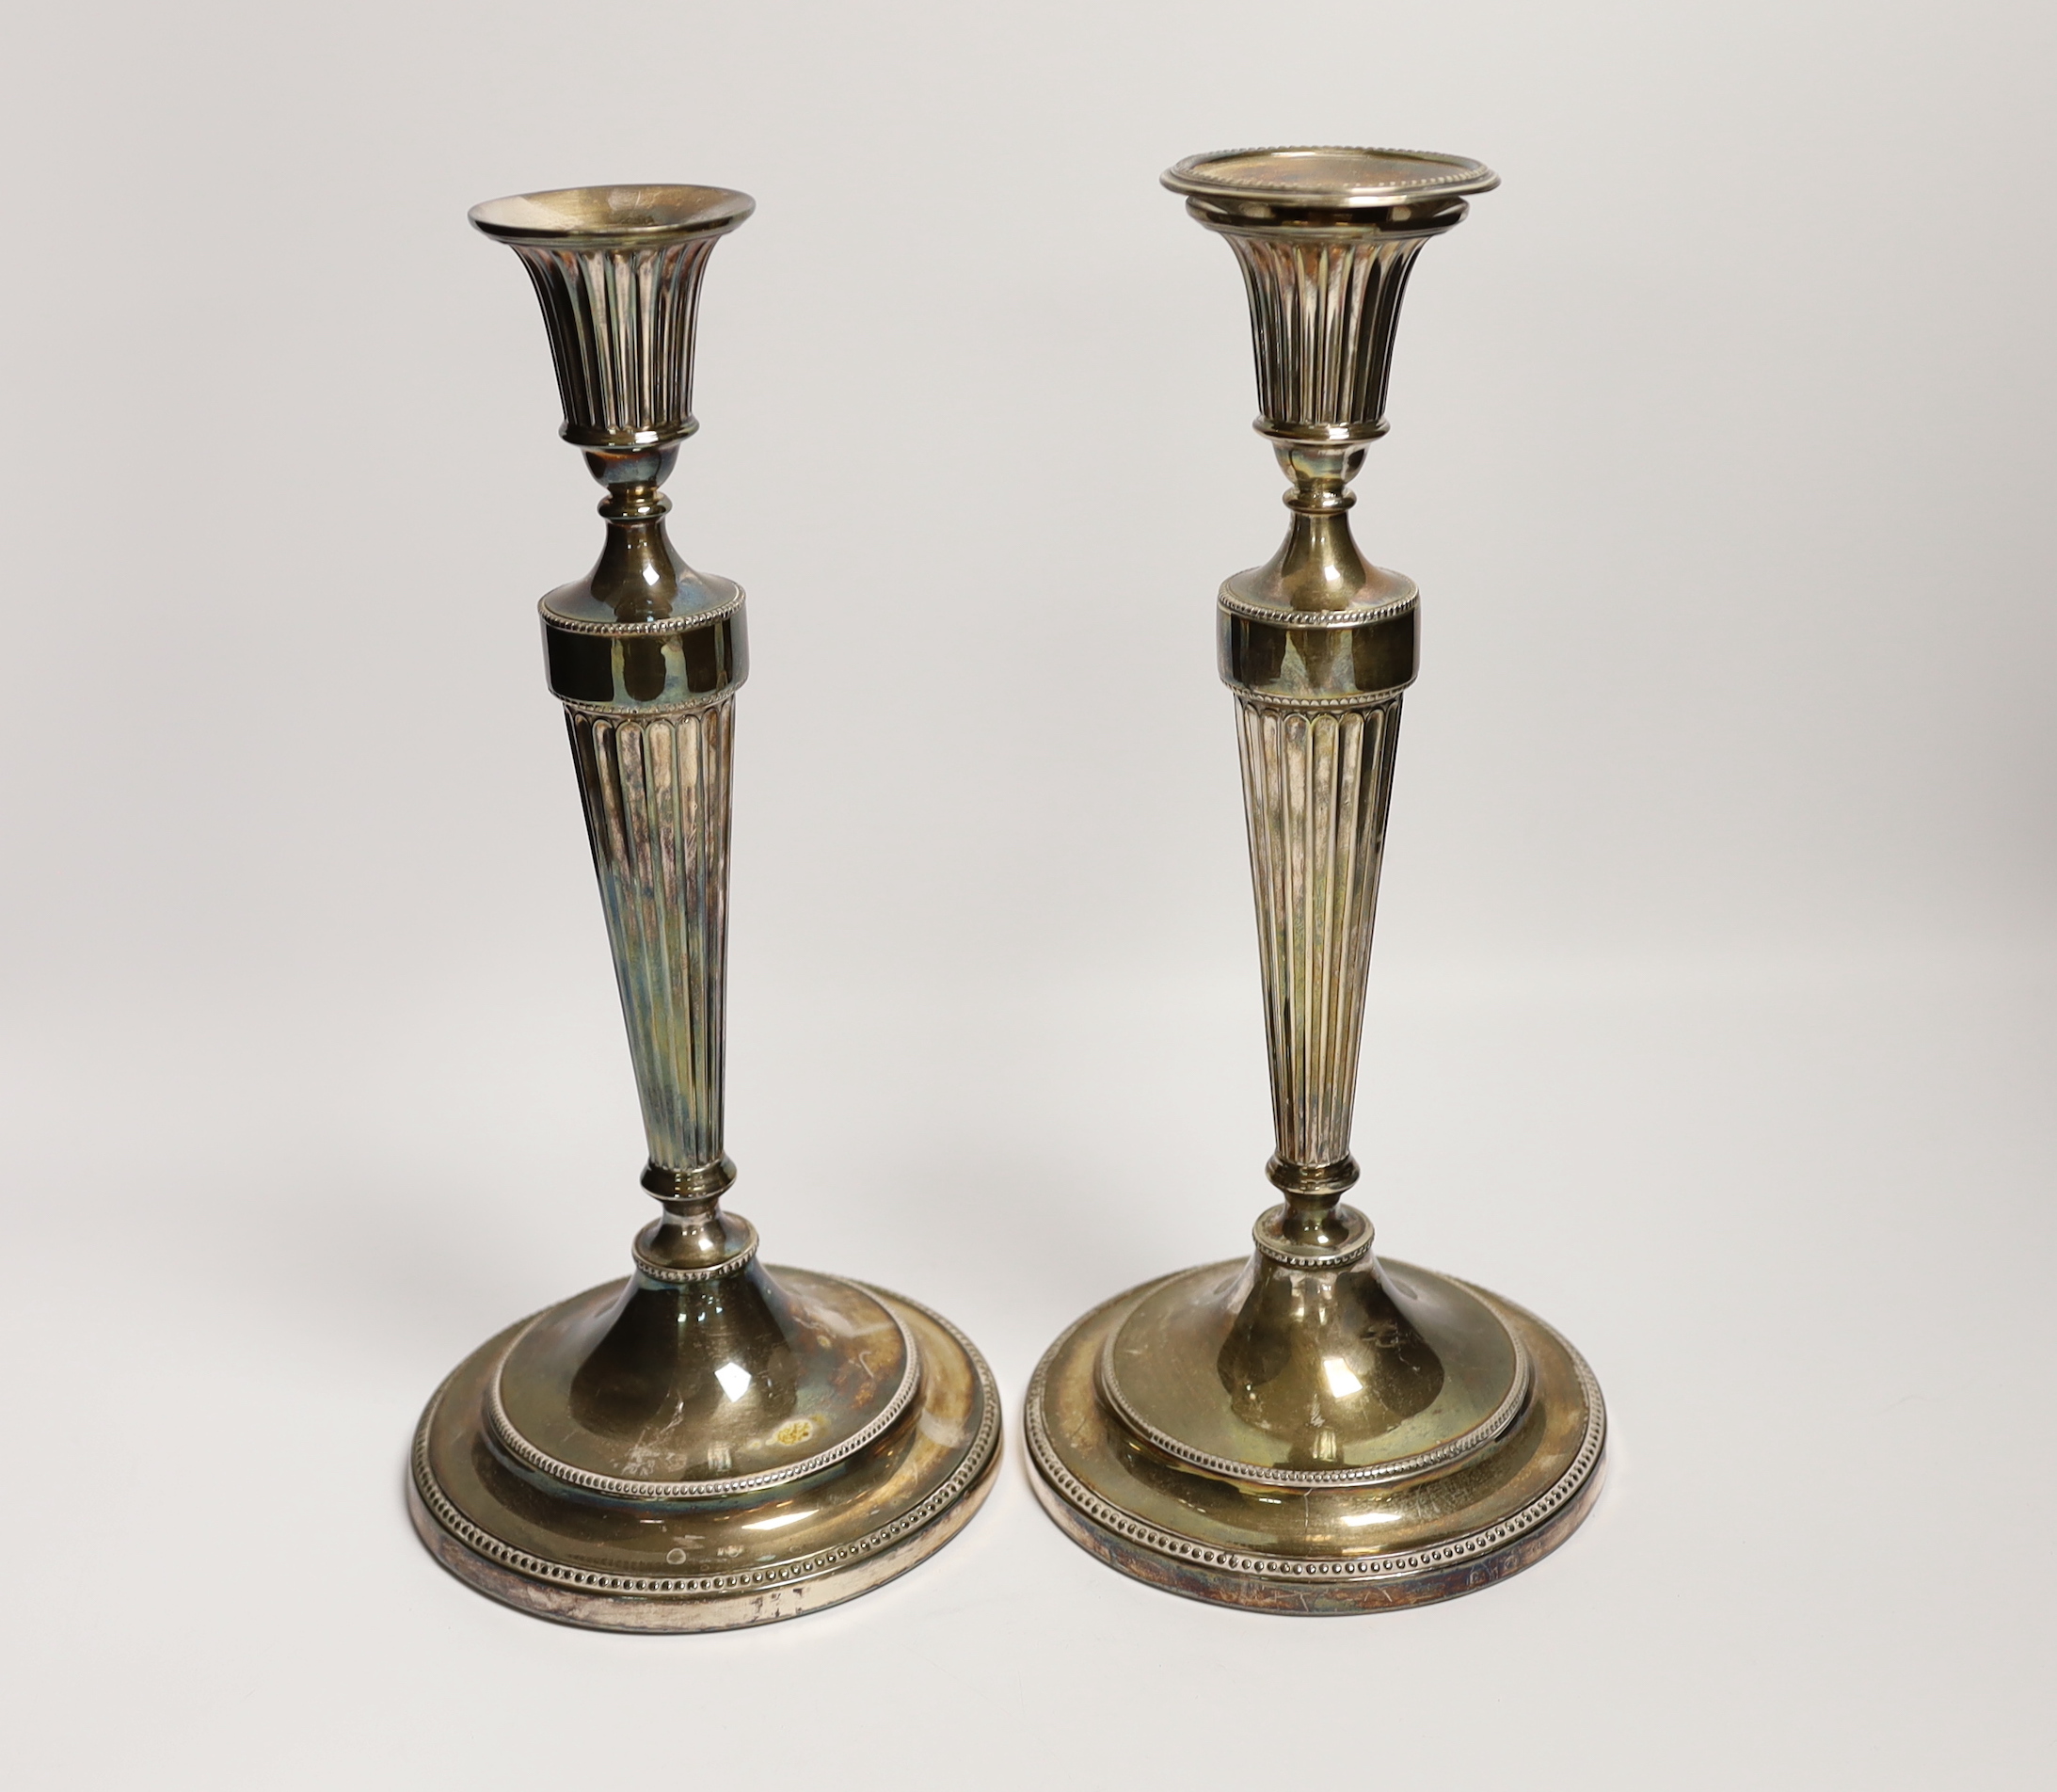 A pair of George III silver candlesticks, with waisted fluted stems, John Winter & Co, Sheffield, date letter rubbed, circa 1780, height 30cm, weighted, lacking one sconce.